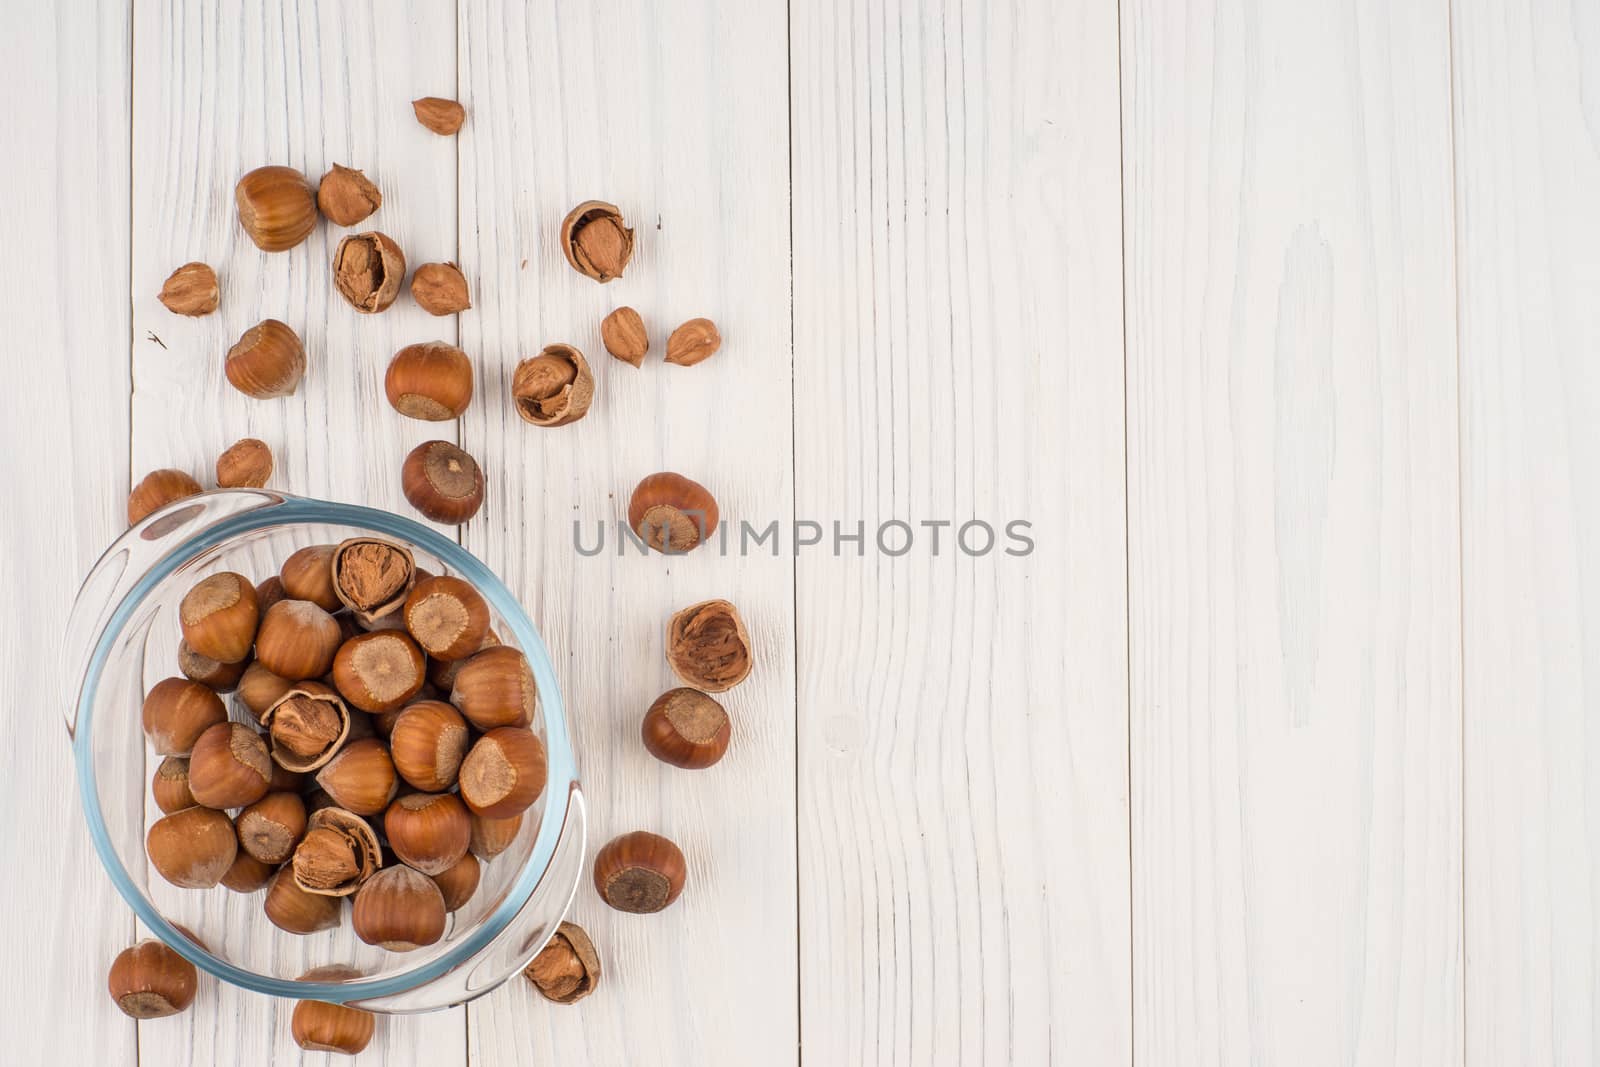 Hazelnut in a glass bowl on the old wooden table. Top view.